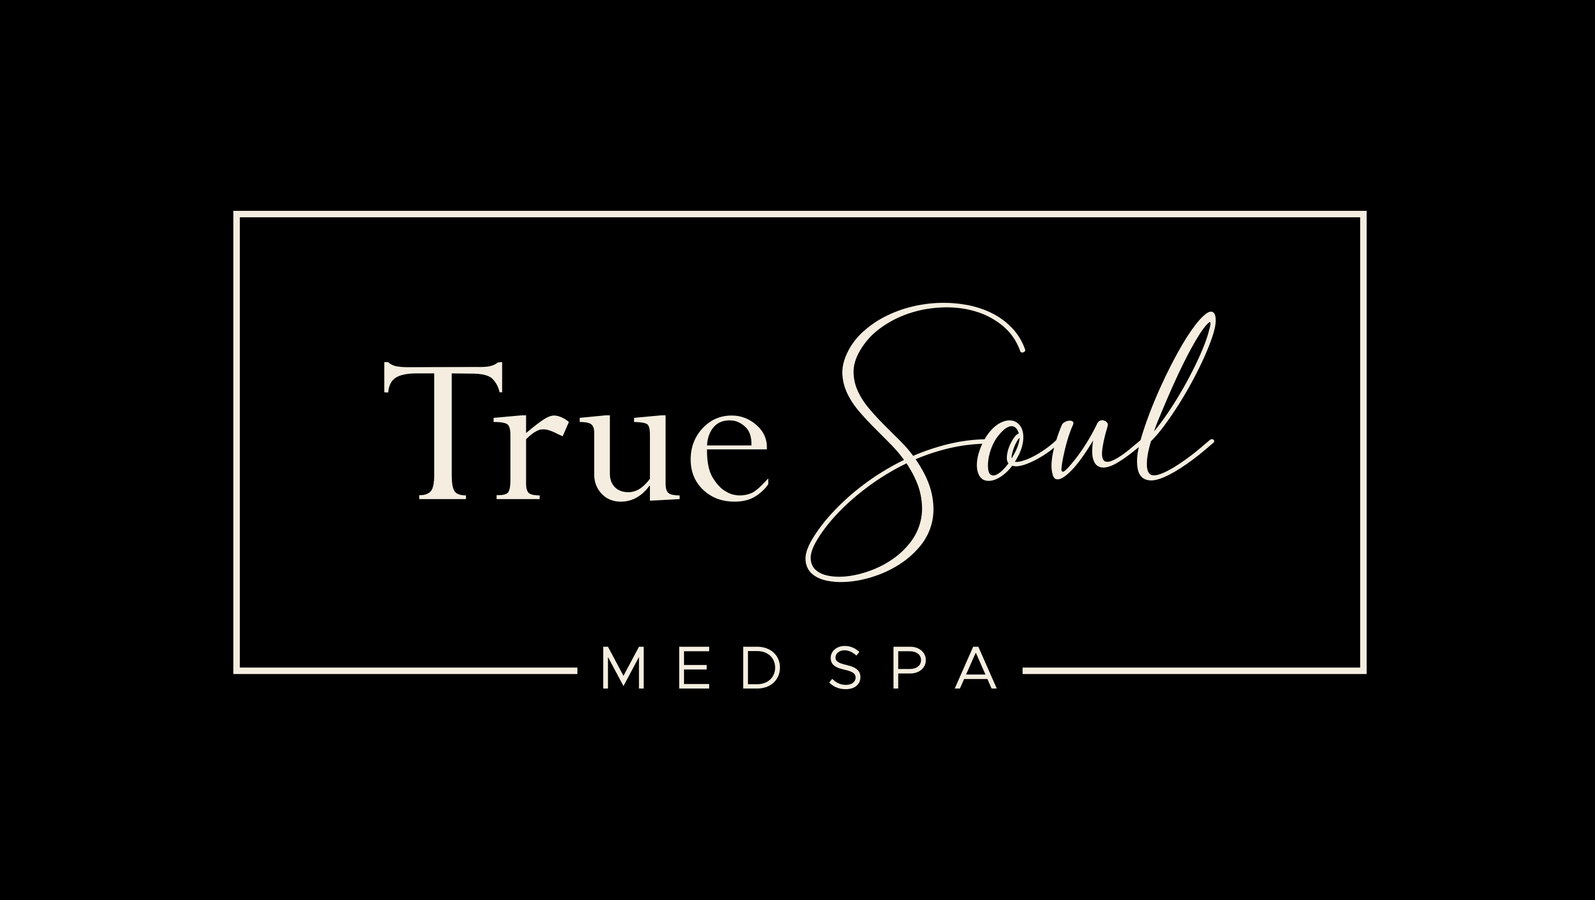 a black and white logo for a spa called true soul med spa .